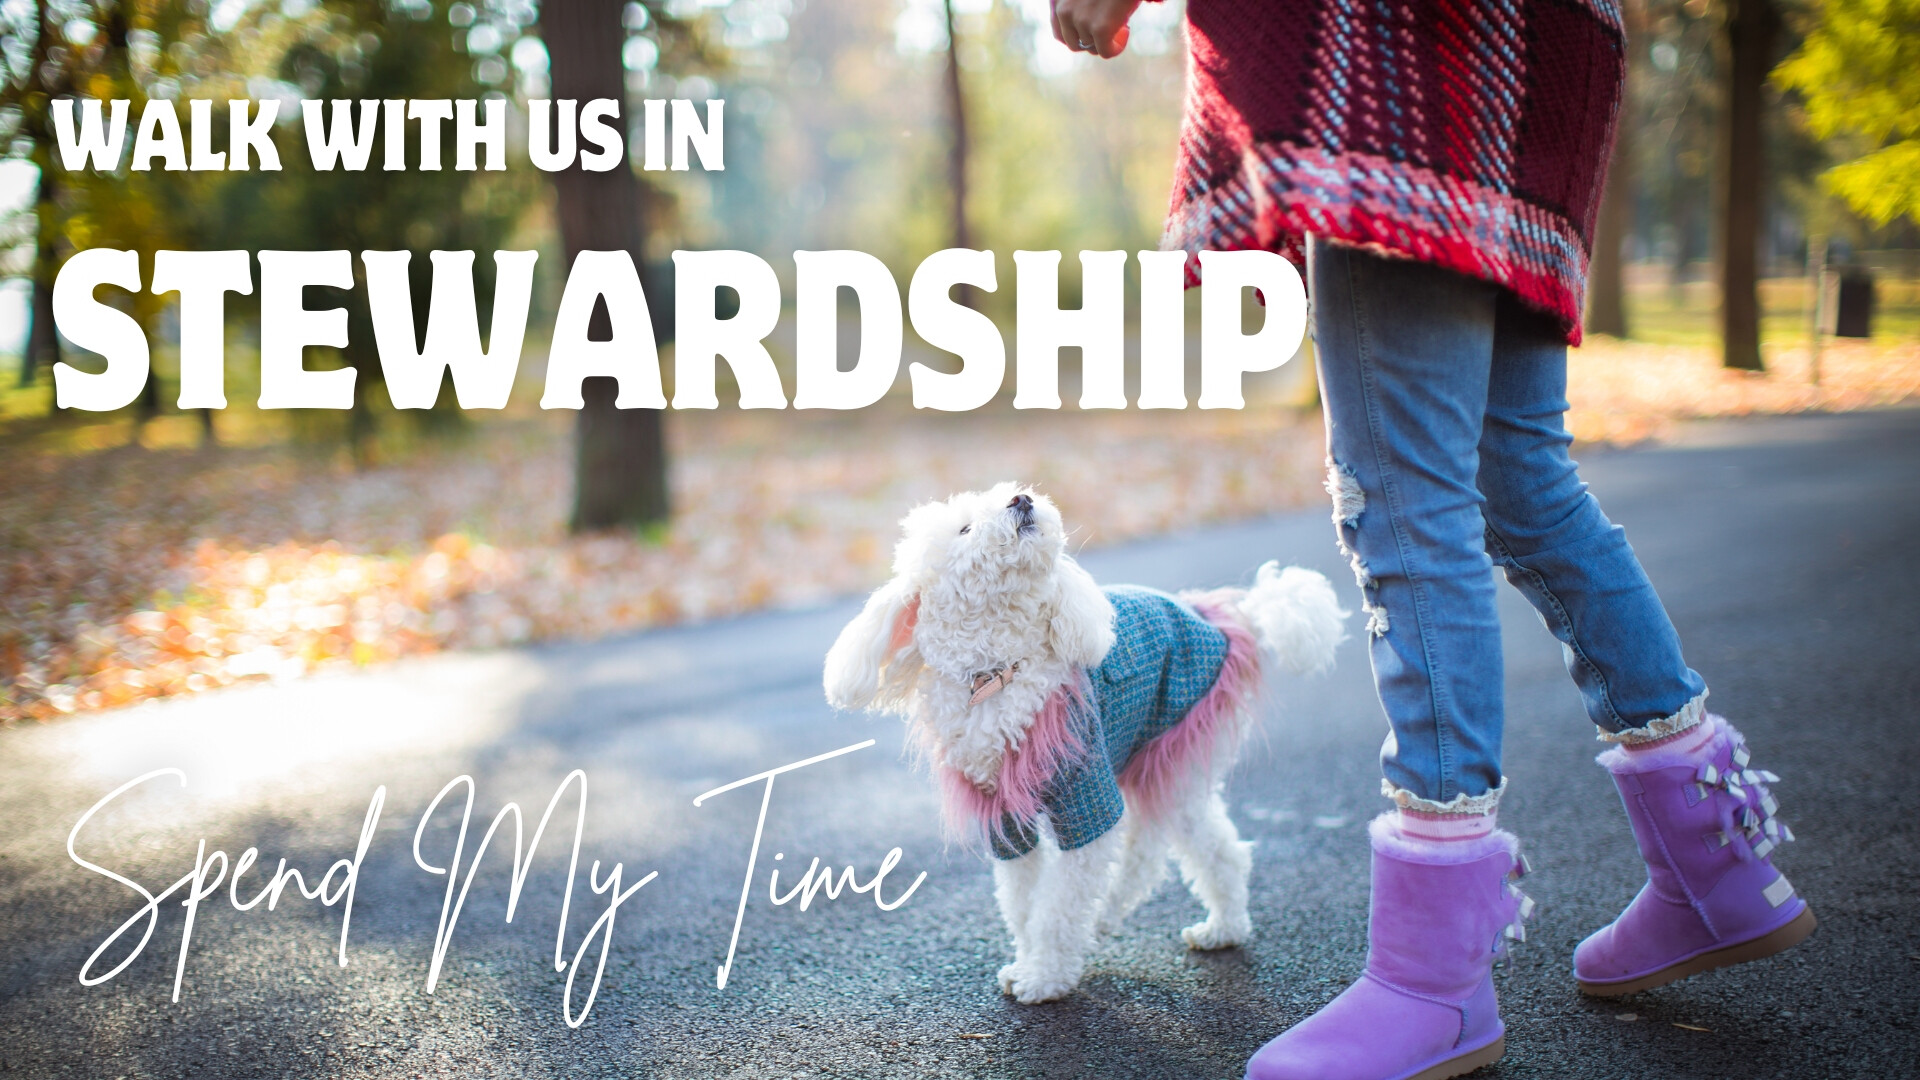 Walk With Us in Stewardship: Spend My Time